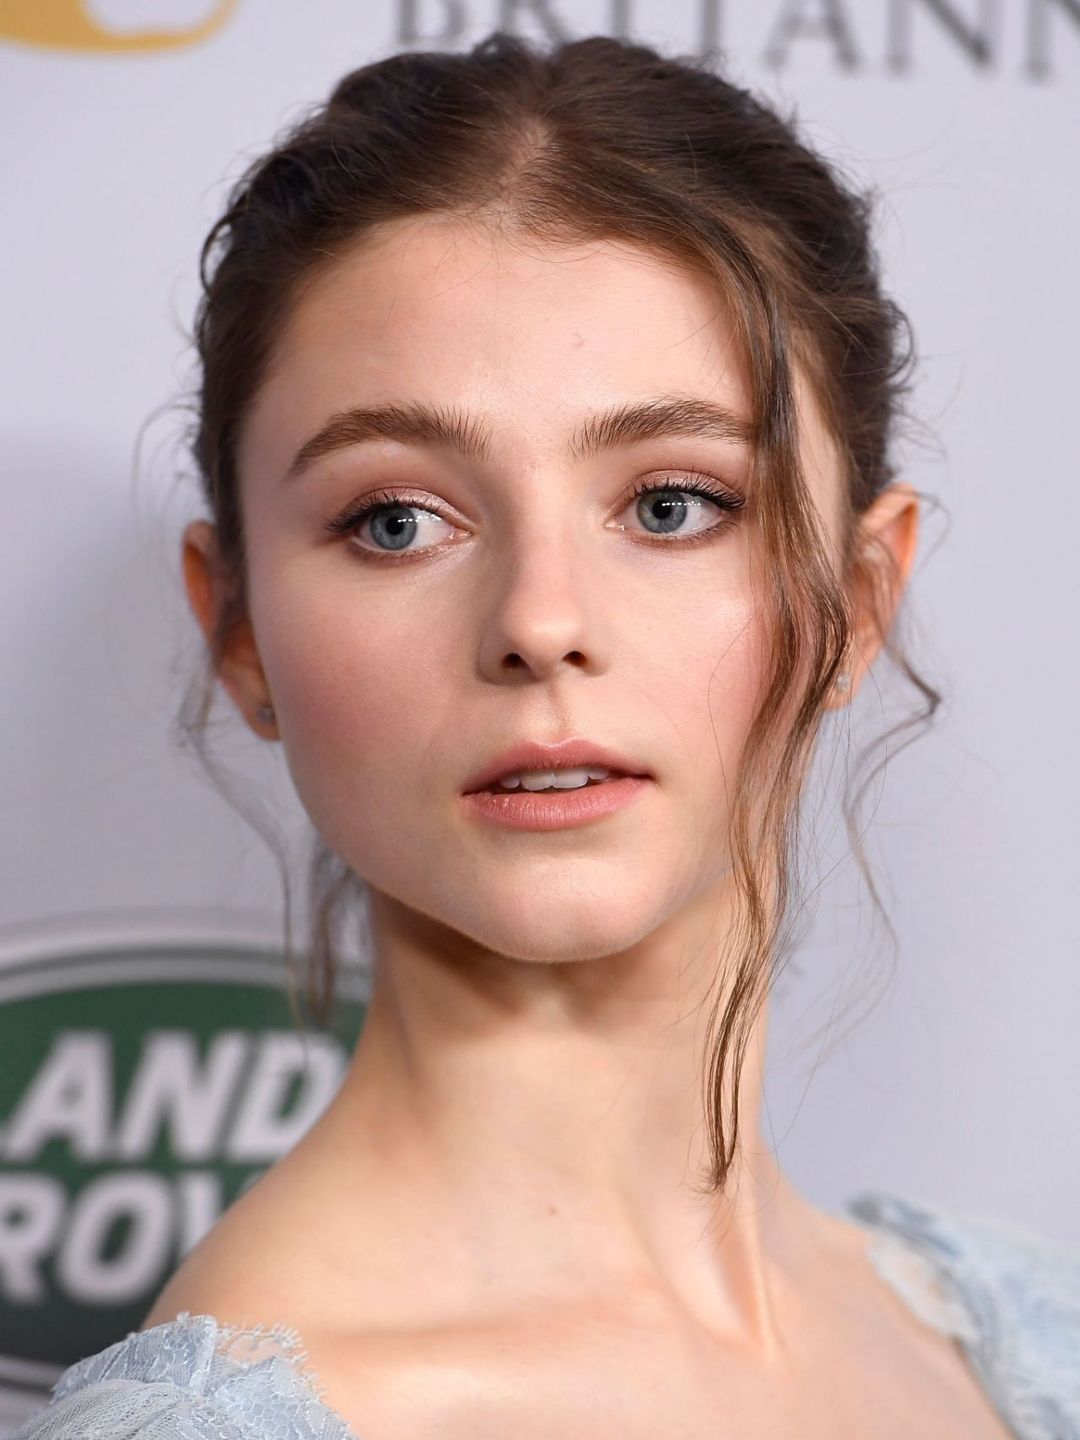 Thomasin McKenzie young age